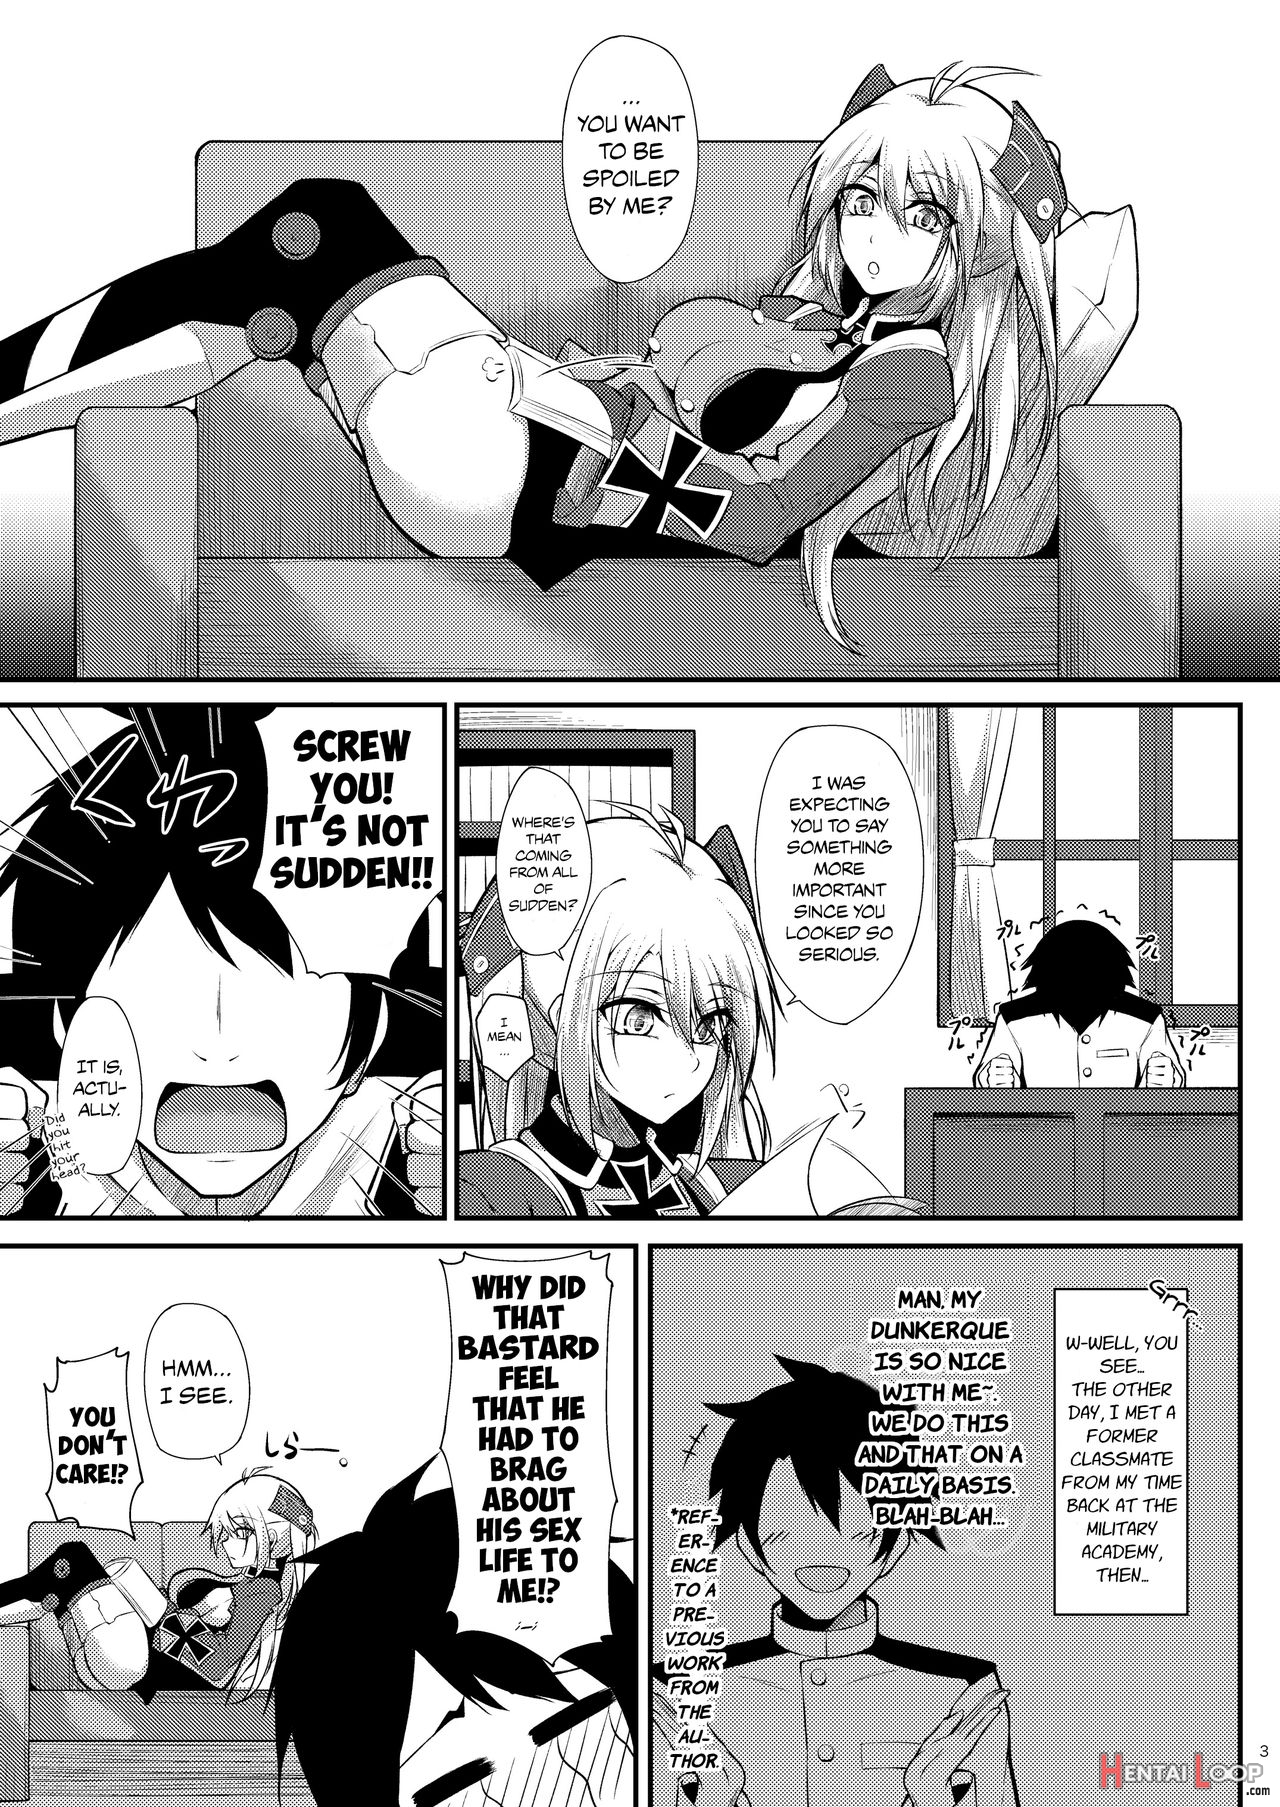 I Want To Be Spoiled By Prinz Eugen!! page 3